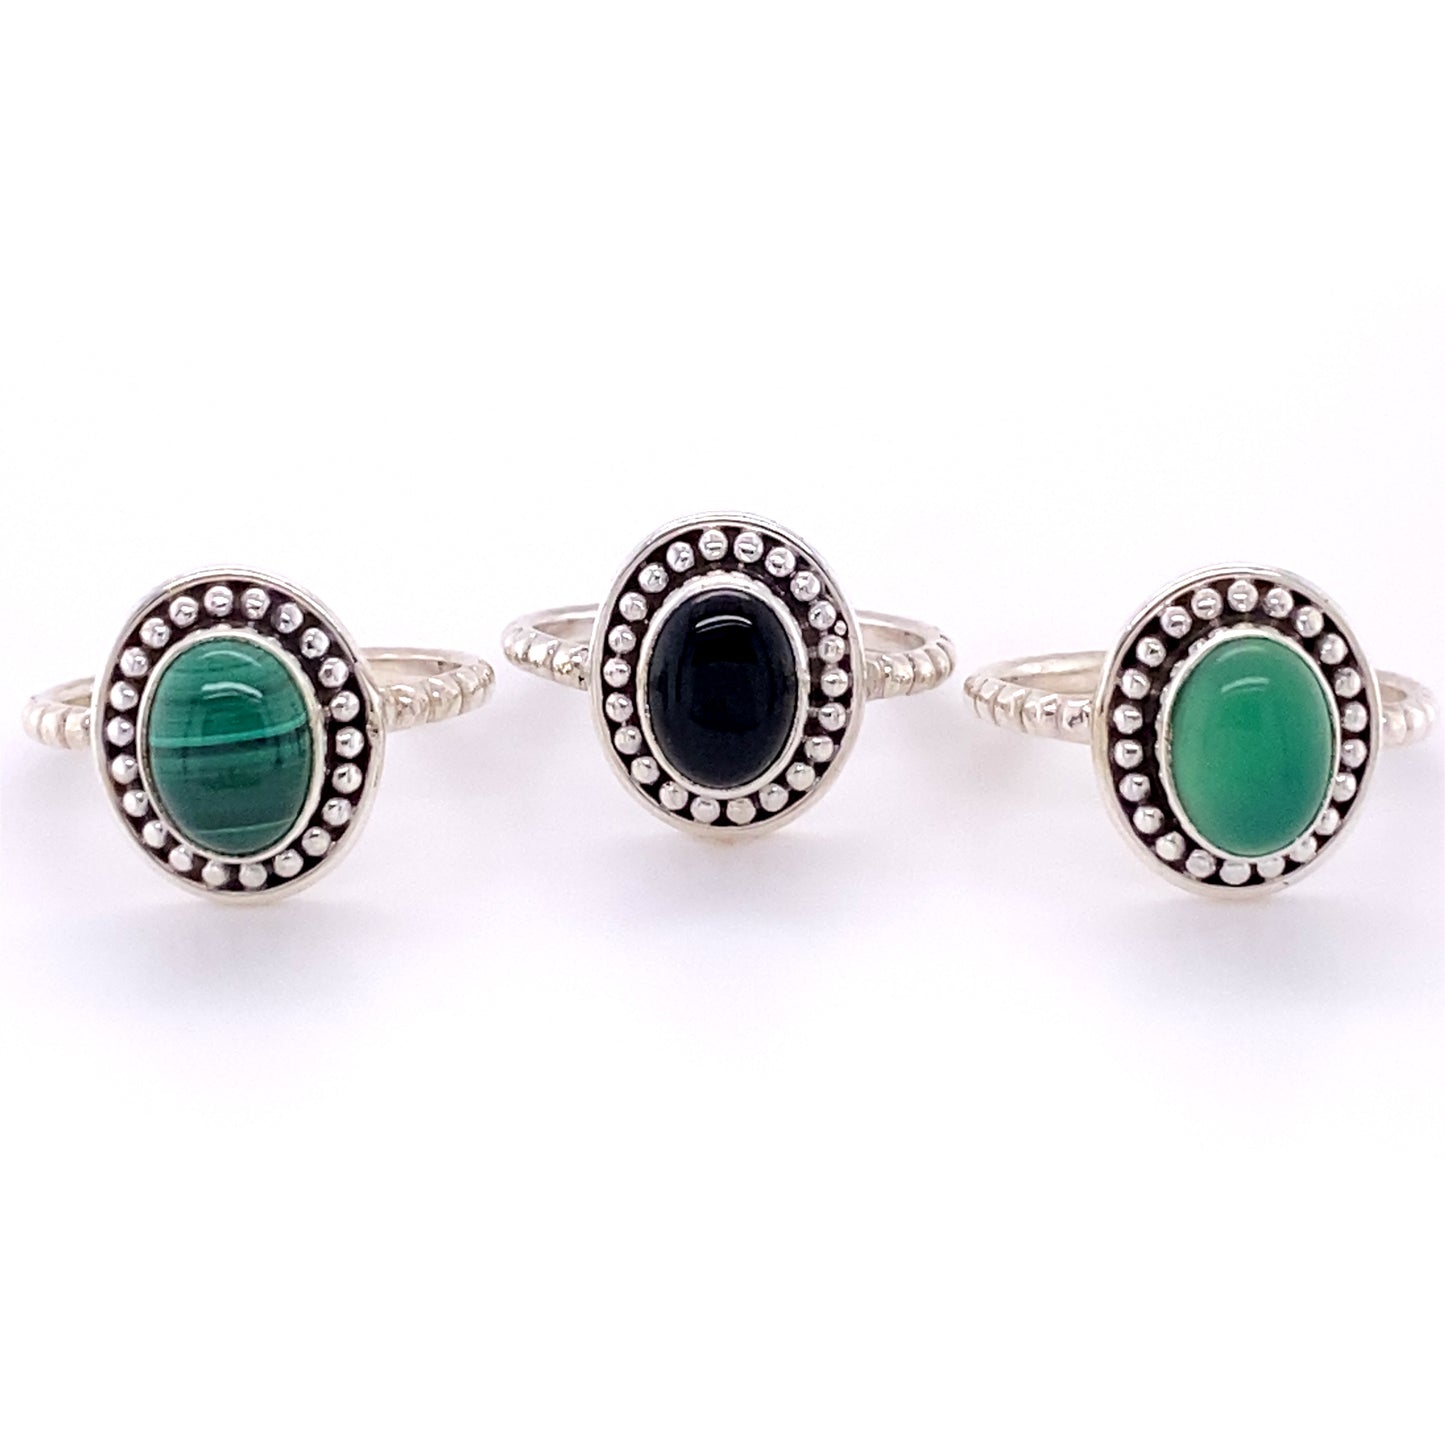 Three Oval Gemstone Rings with Silver Ball Border.